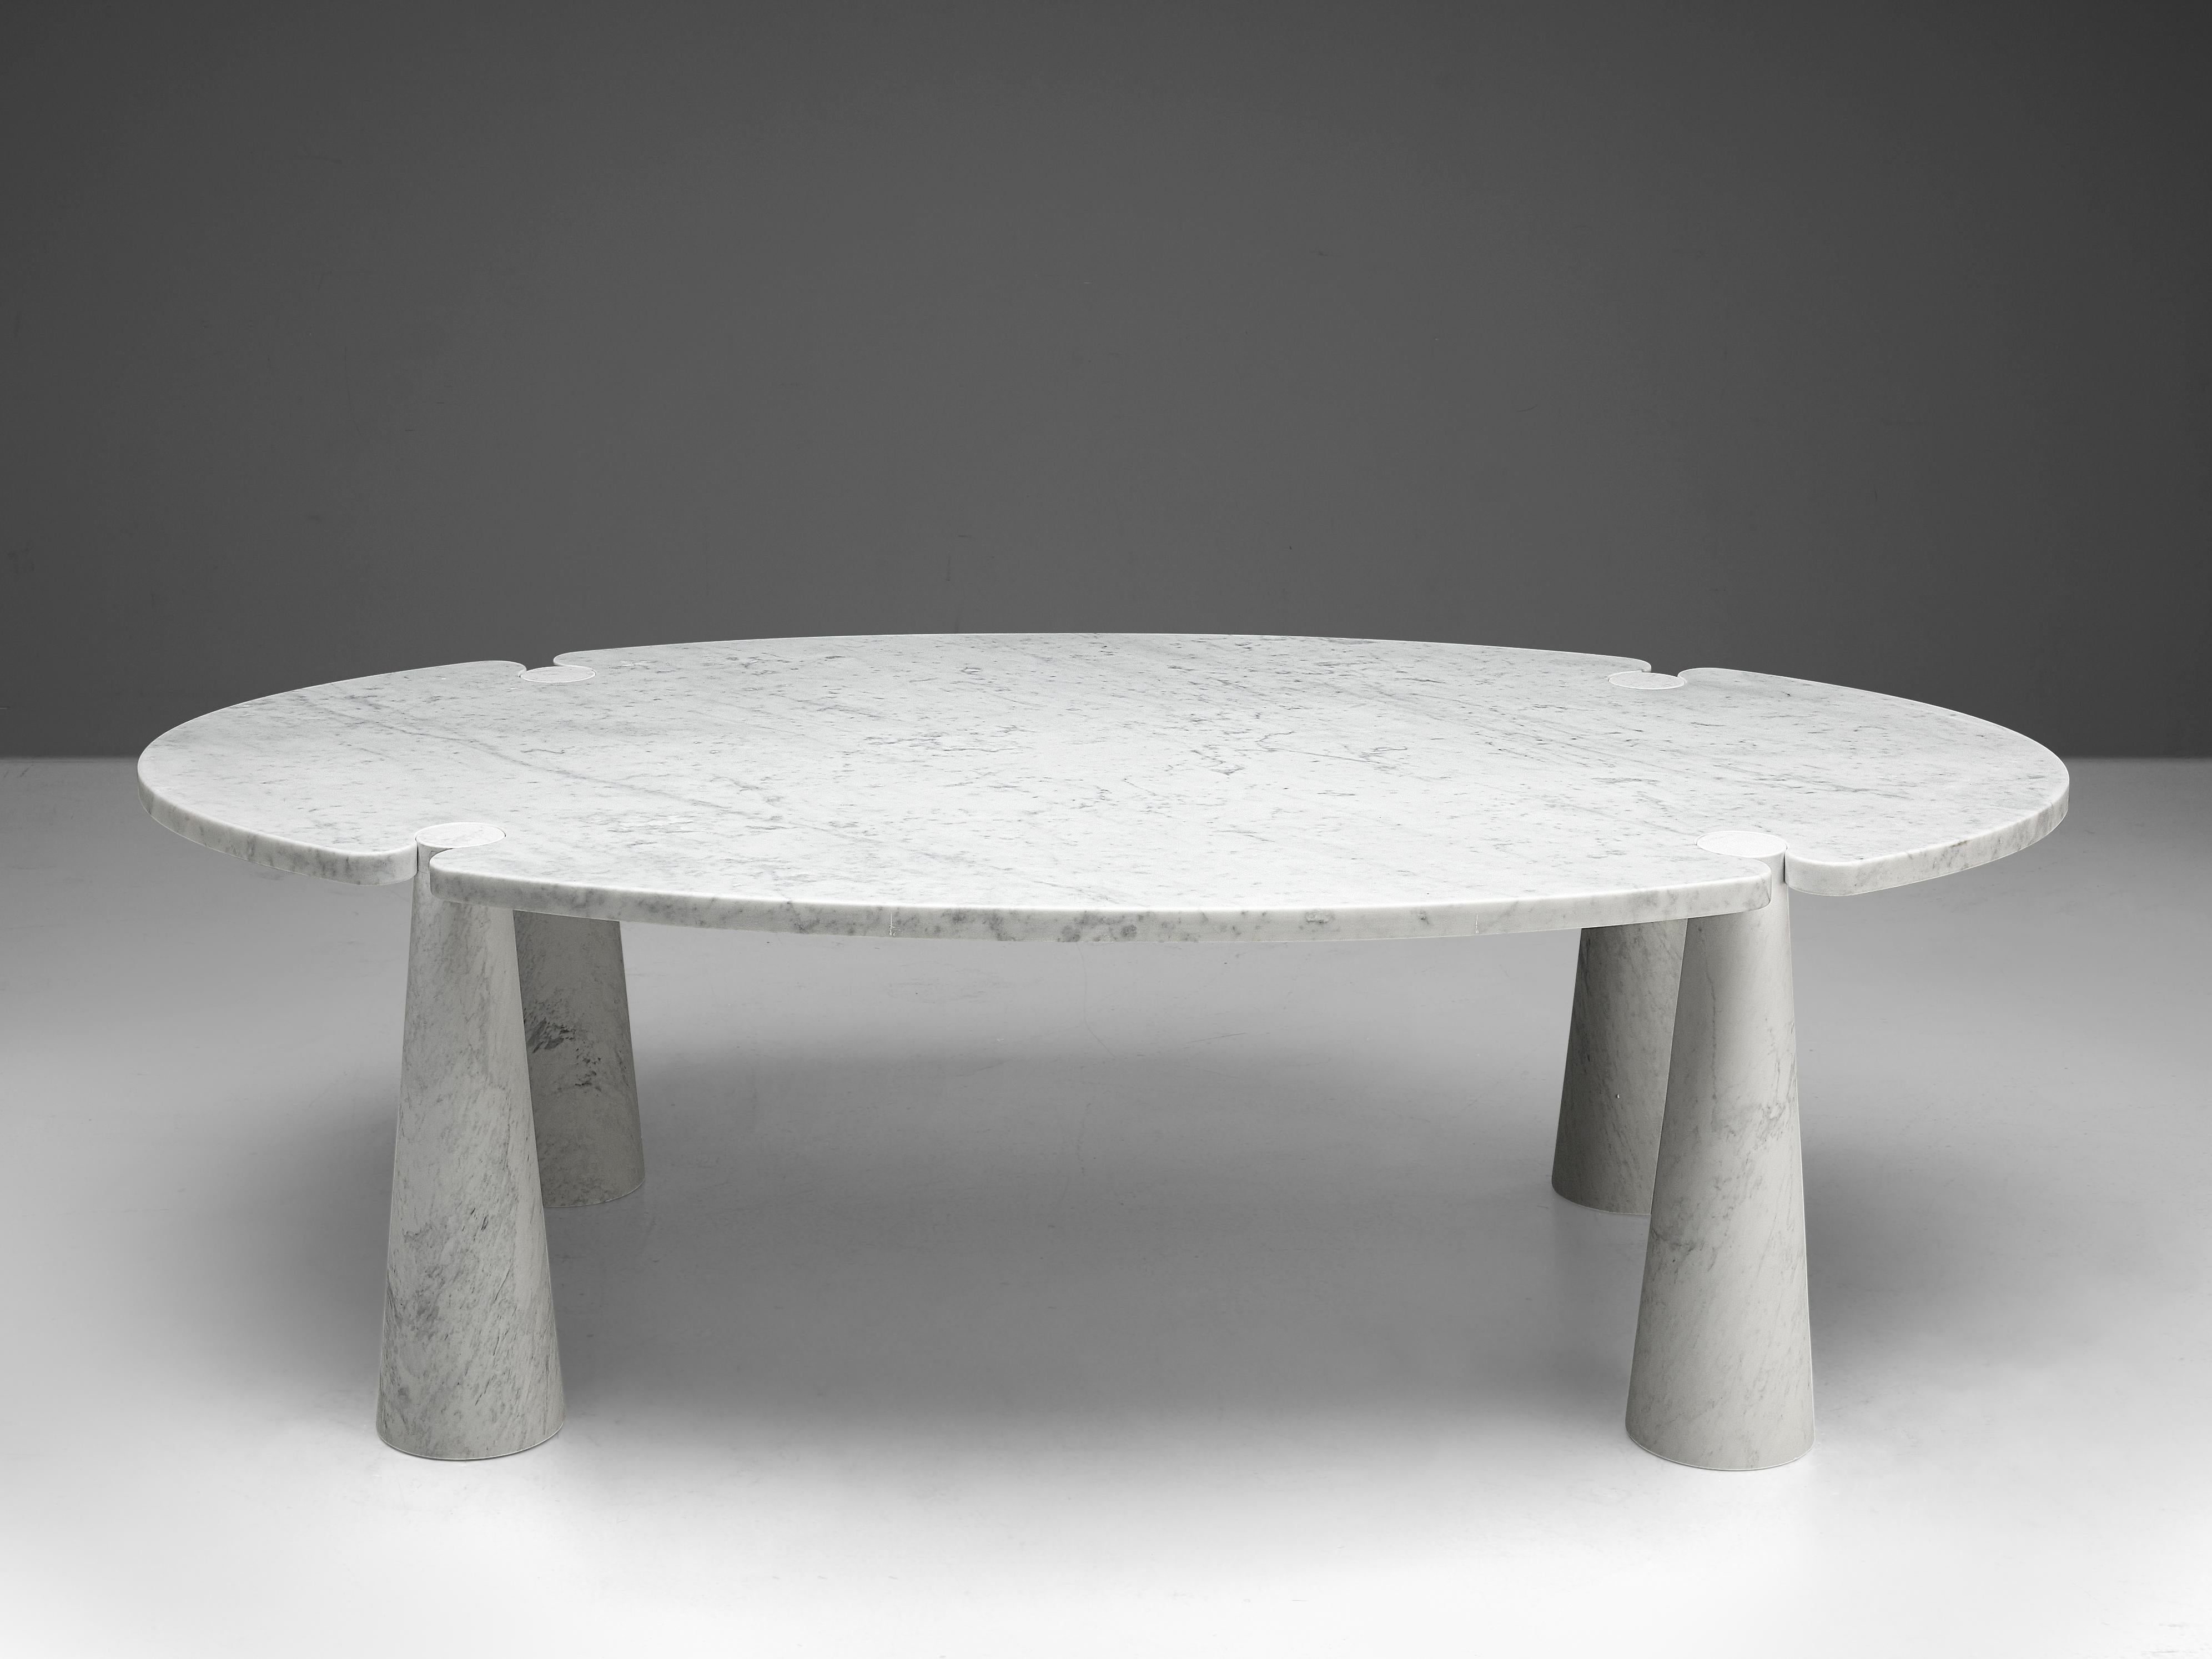 Angelo Mangiarotti, dining table ‘Eros’, white marble, 1970s

This sculptural table by Angelo Mangiarotti is a skillful example of postmodern design. The table is executed in white marble. The oval tabletop features no joints or clamps and is